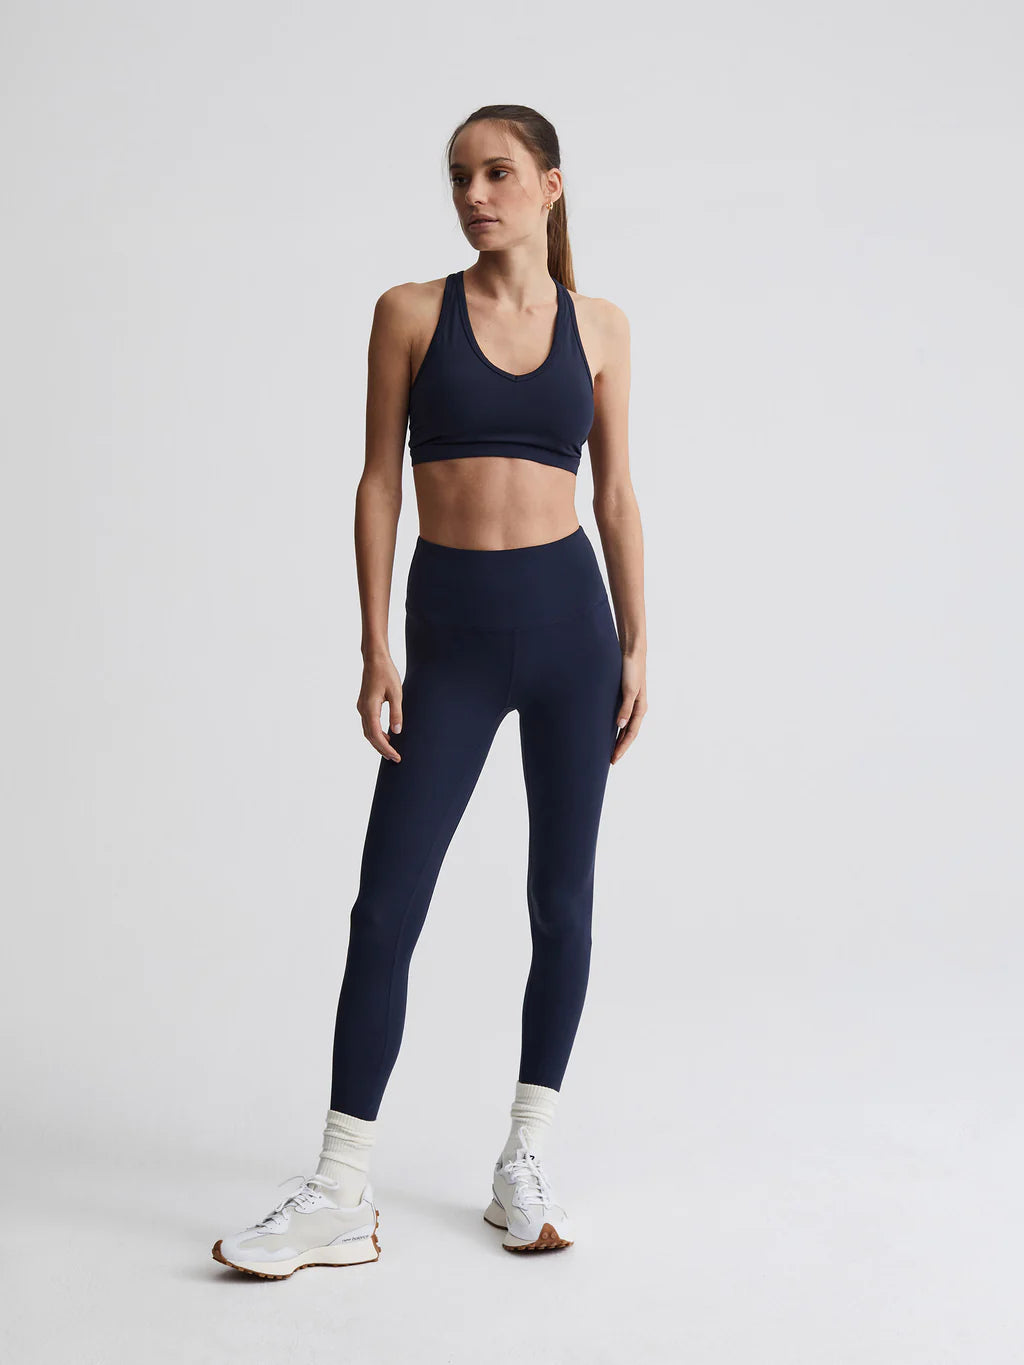 Varley Let's Move Leggings  Active outfits, Leggings fashion, High rise  style